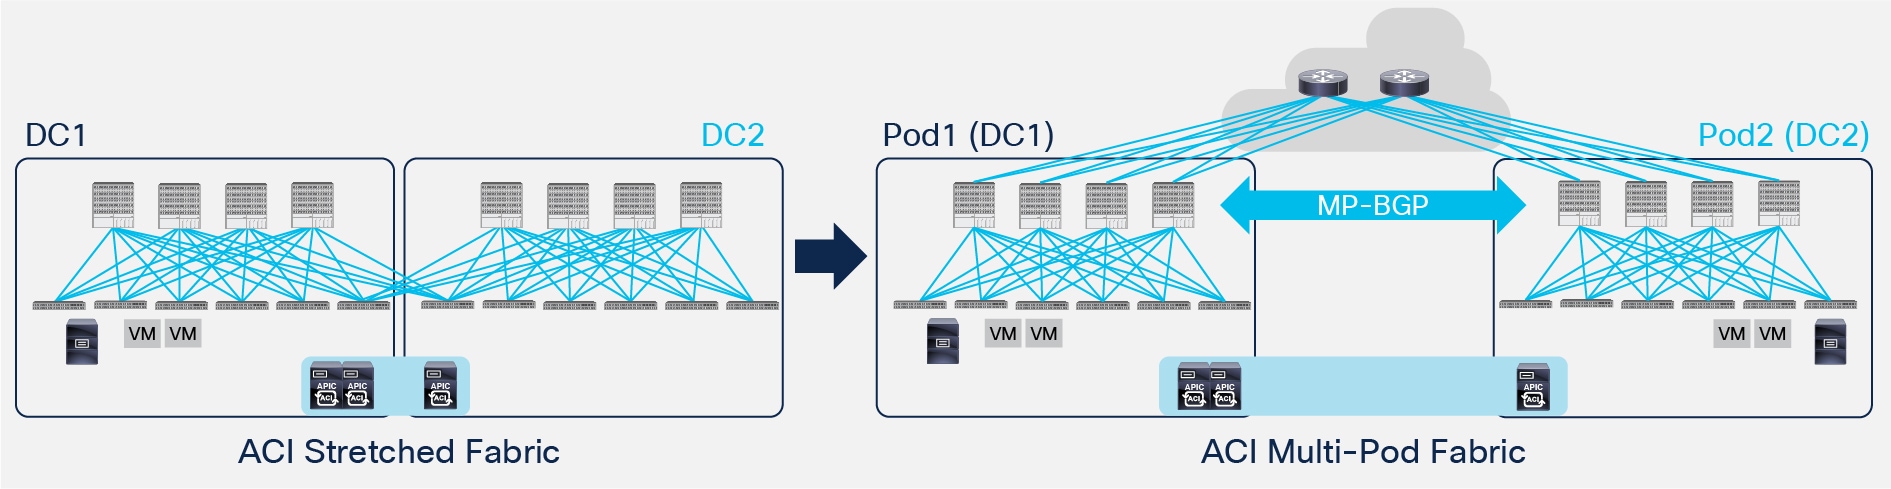 Migrating from Stretched Fabric to Multi-Pod by Separating the Original DCs